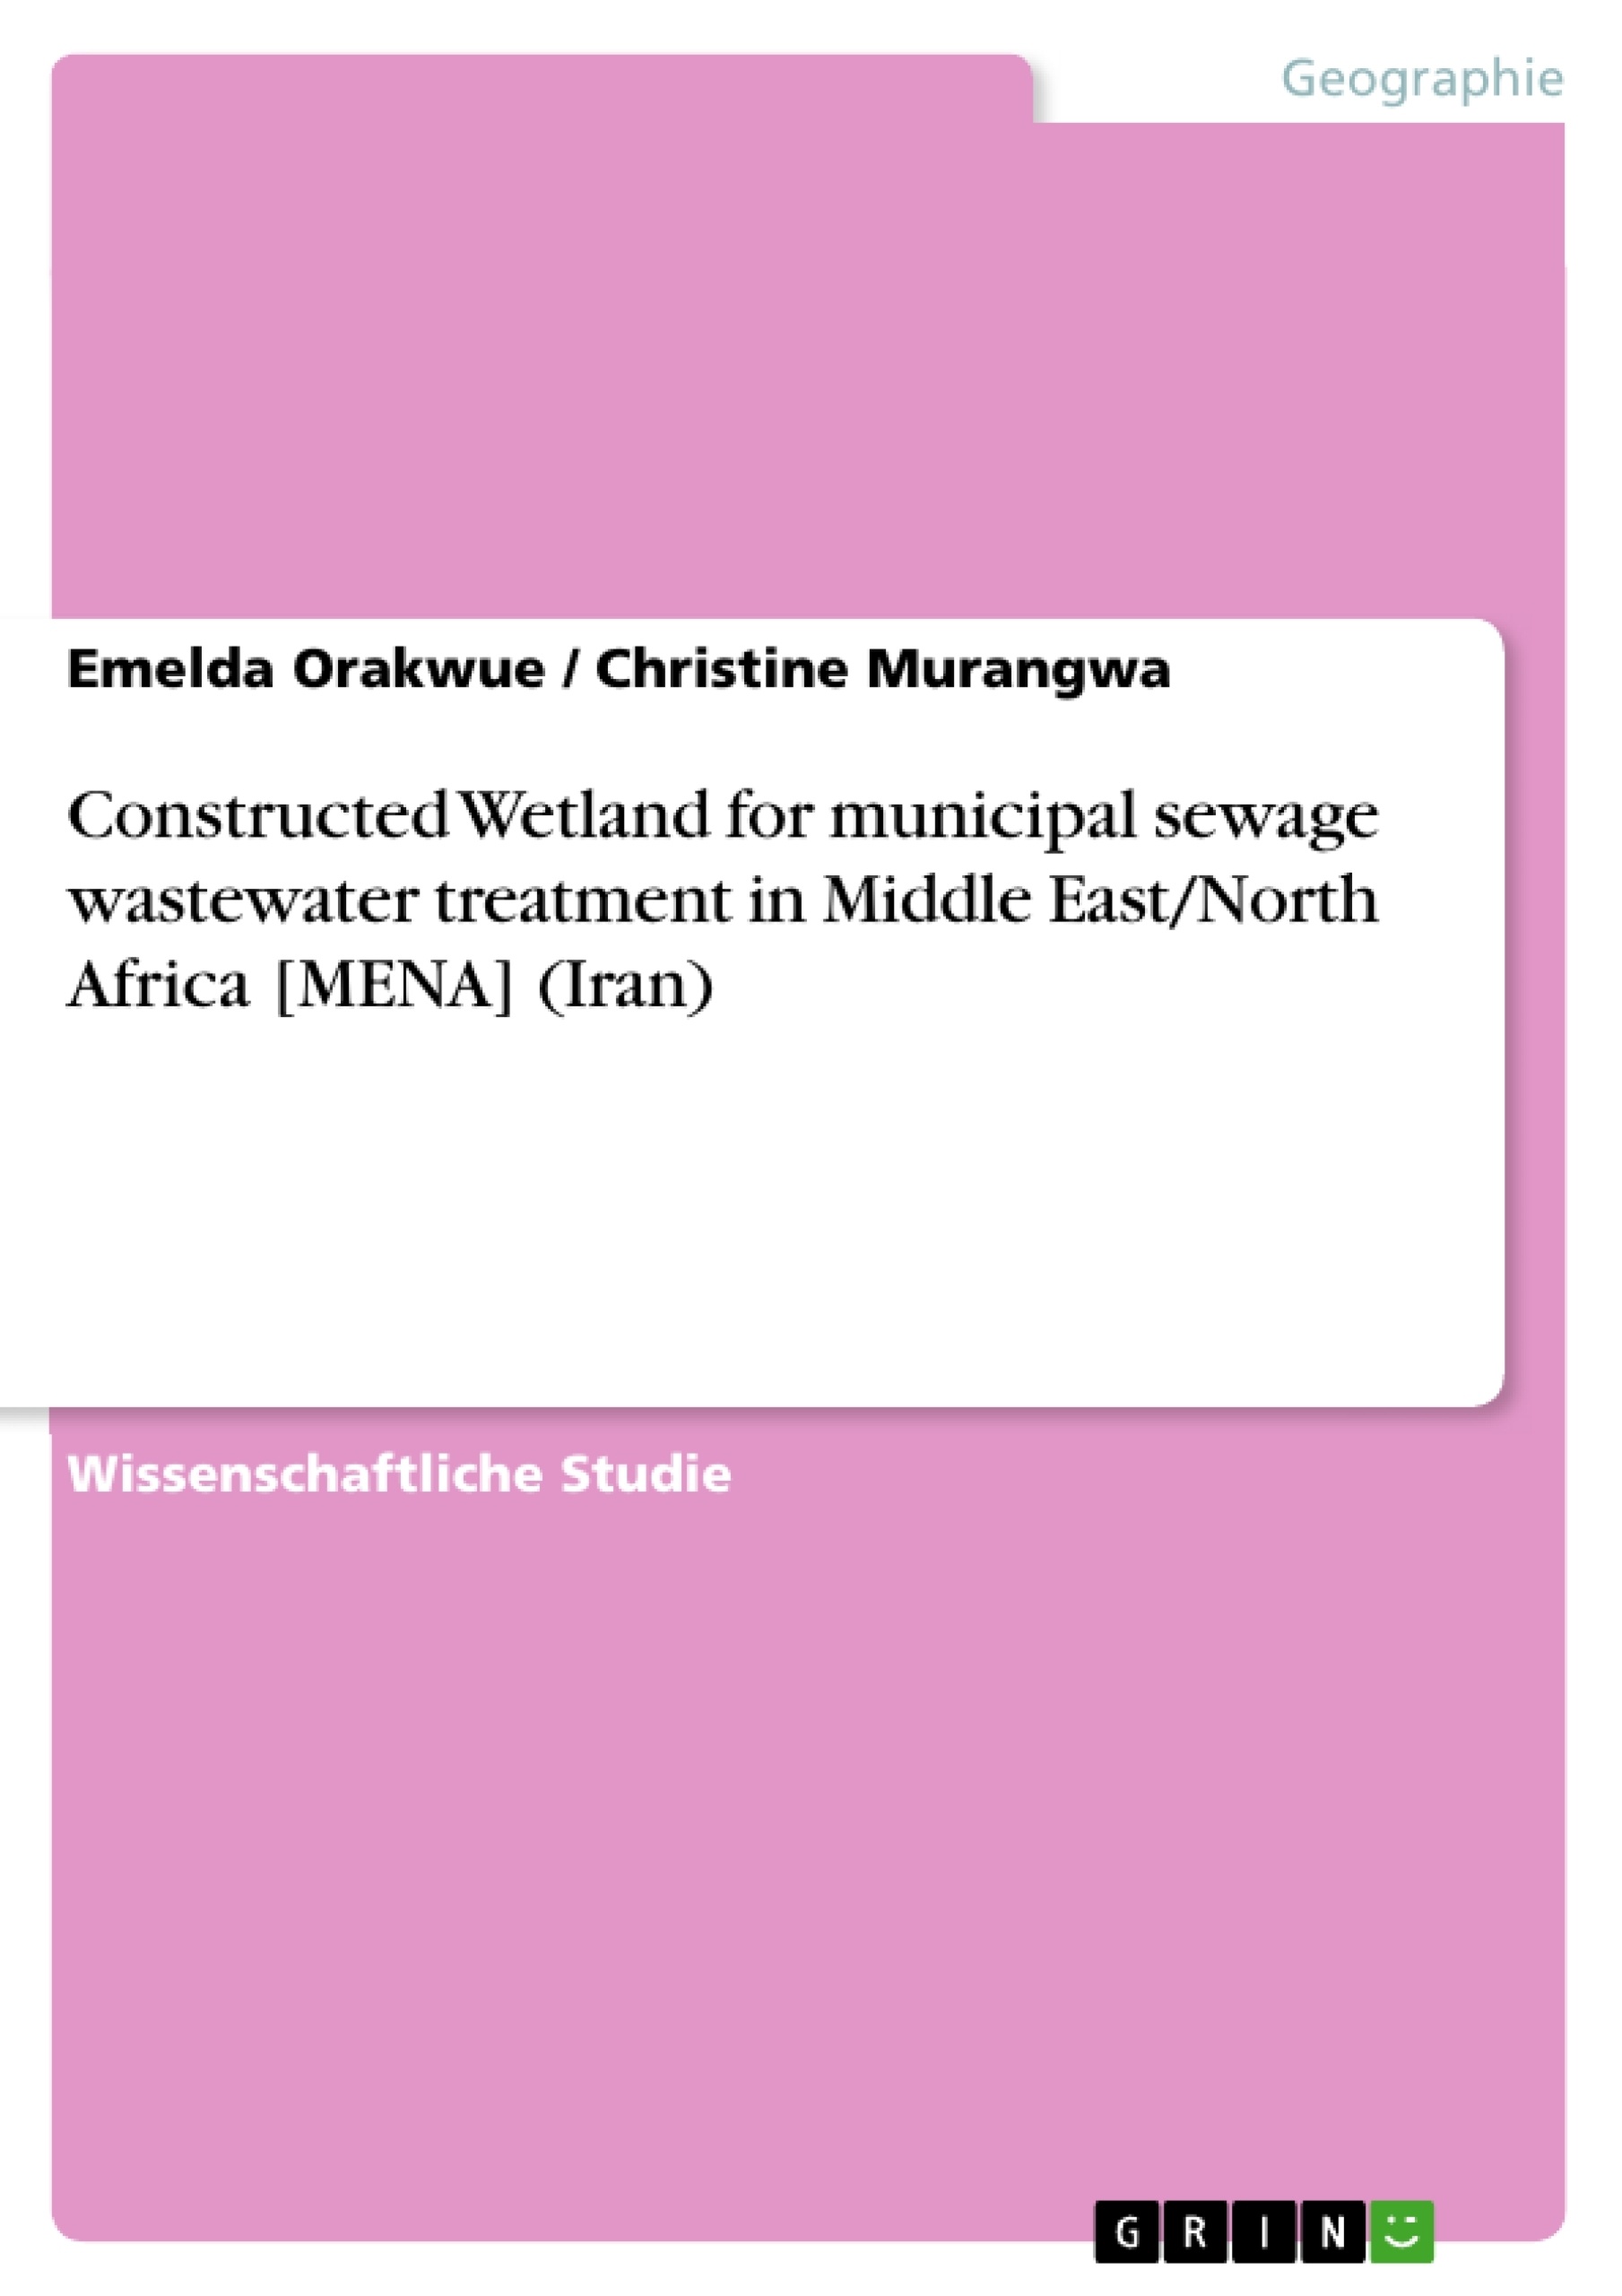 Titel: Constructed Wetland for municipal sewage wastewater treatment in Middle East/North Africa [MENA] (Iran)